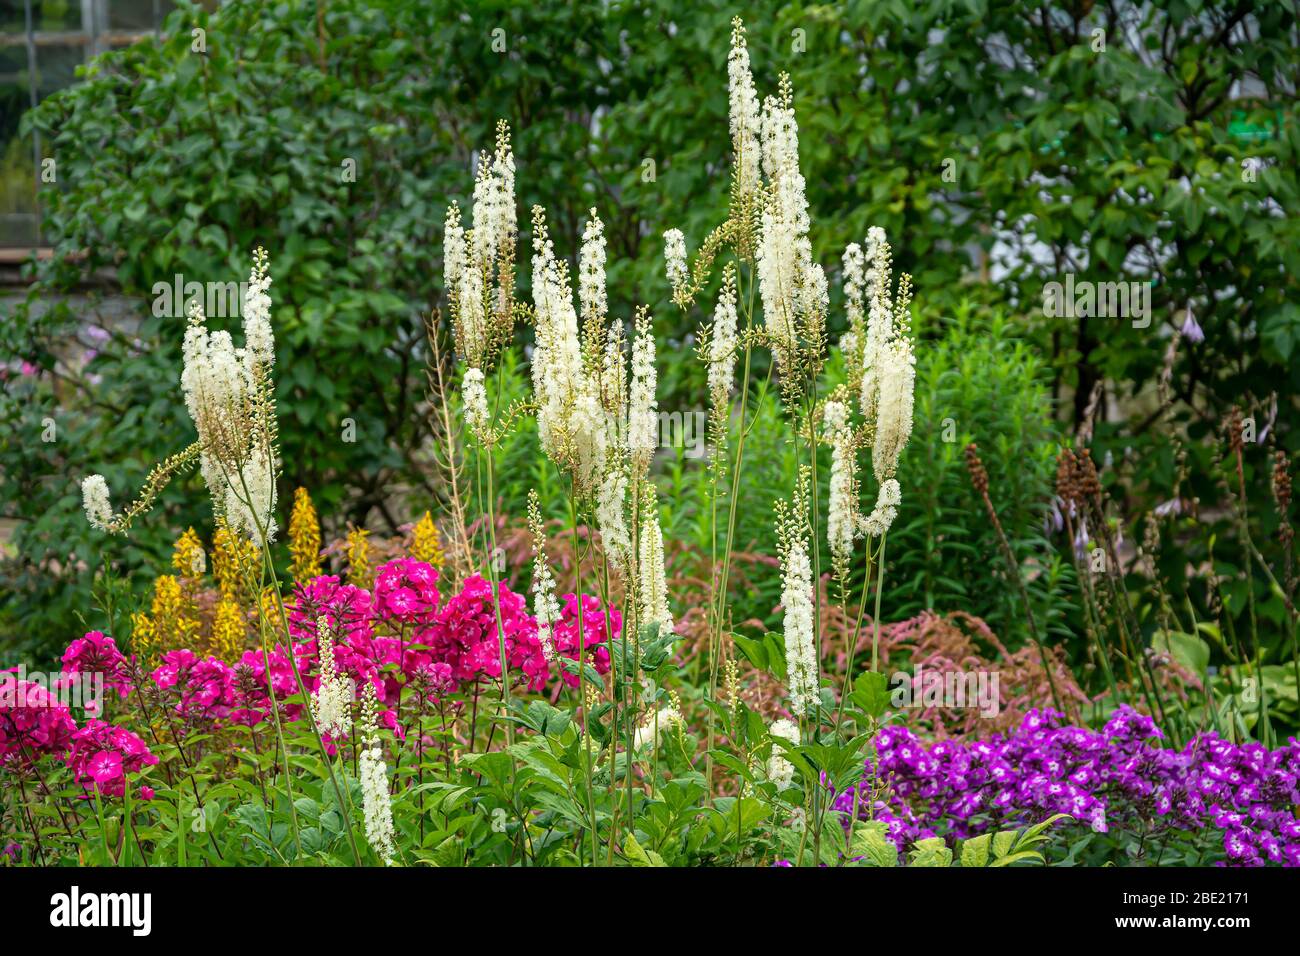 Flowering bush Cimicifuga racemosa on a background of grasses and shrubs in late summer Stock Photo